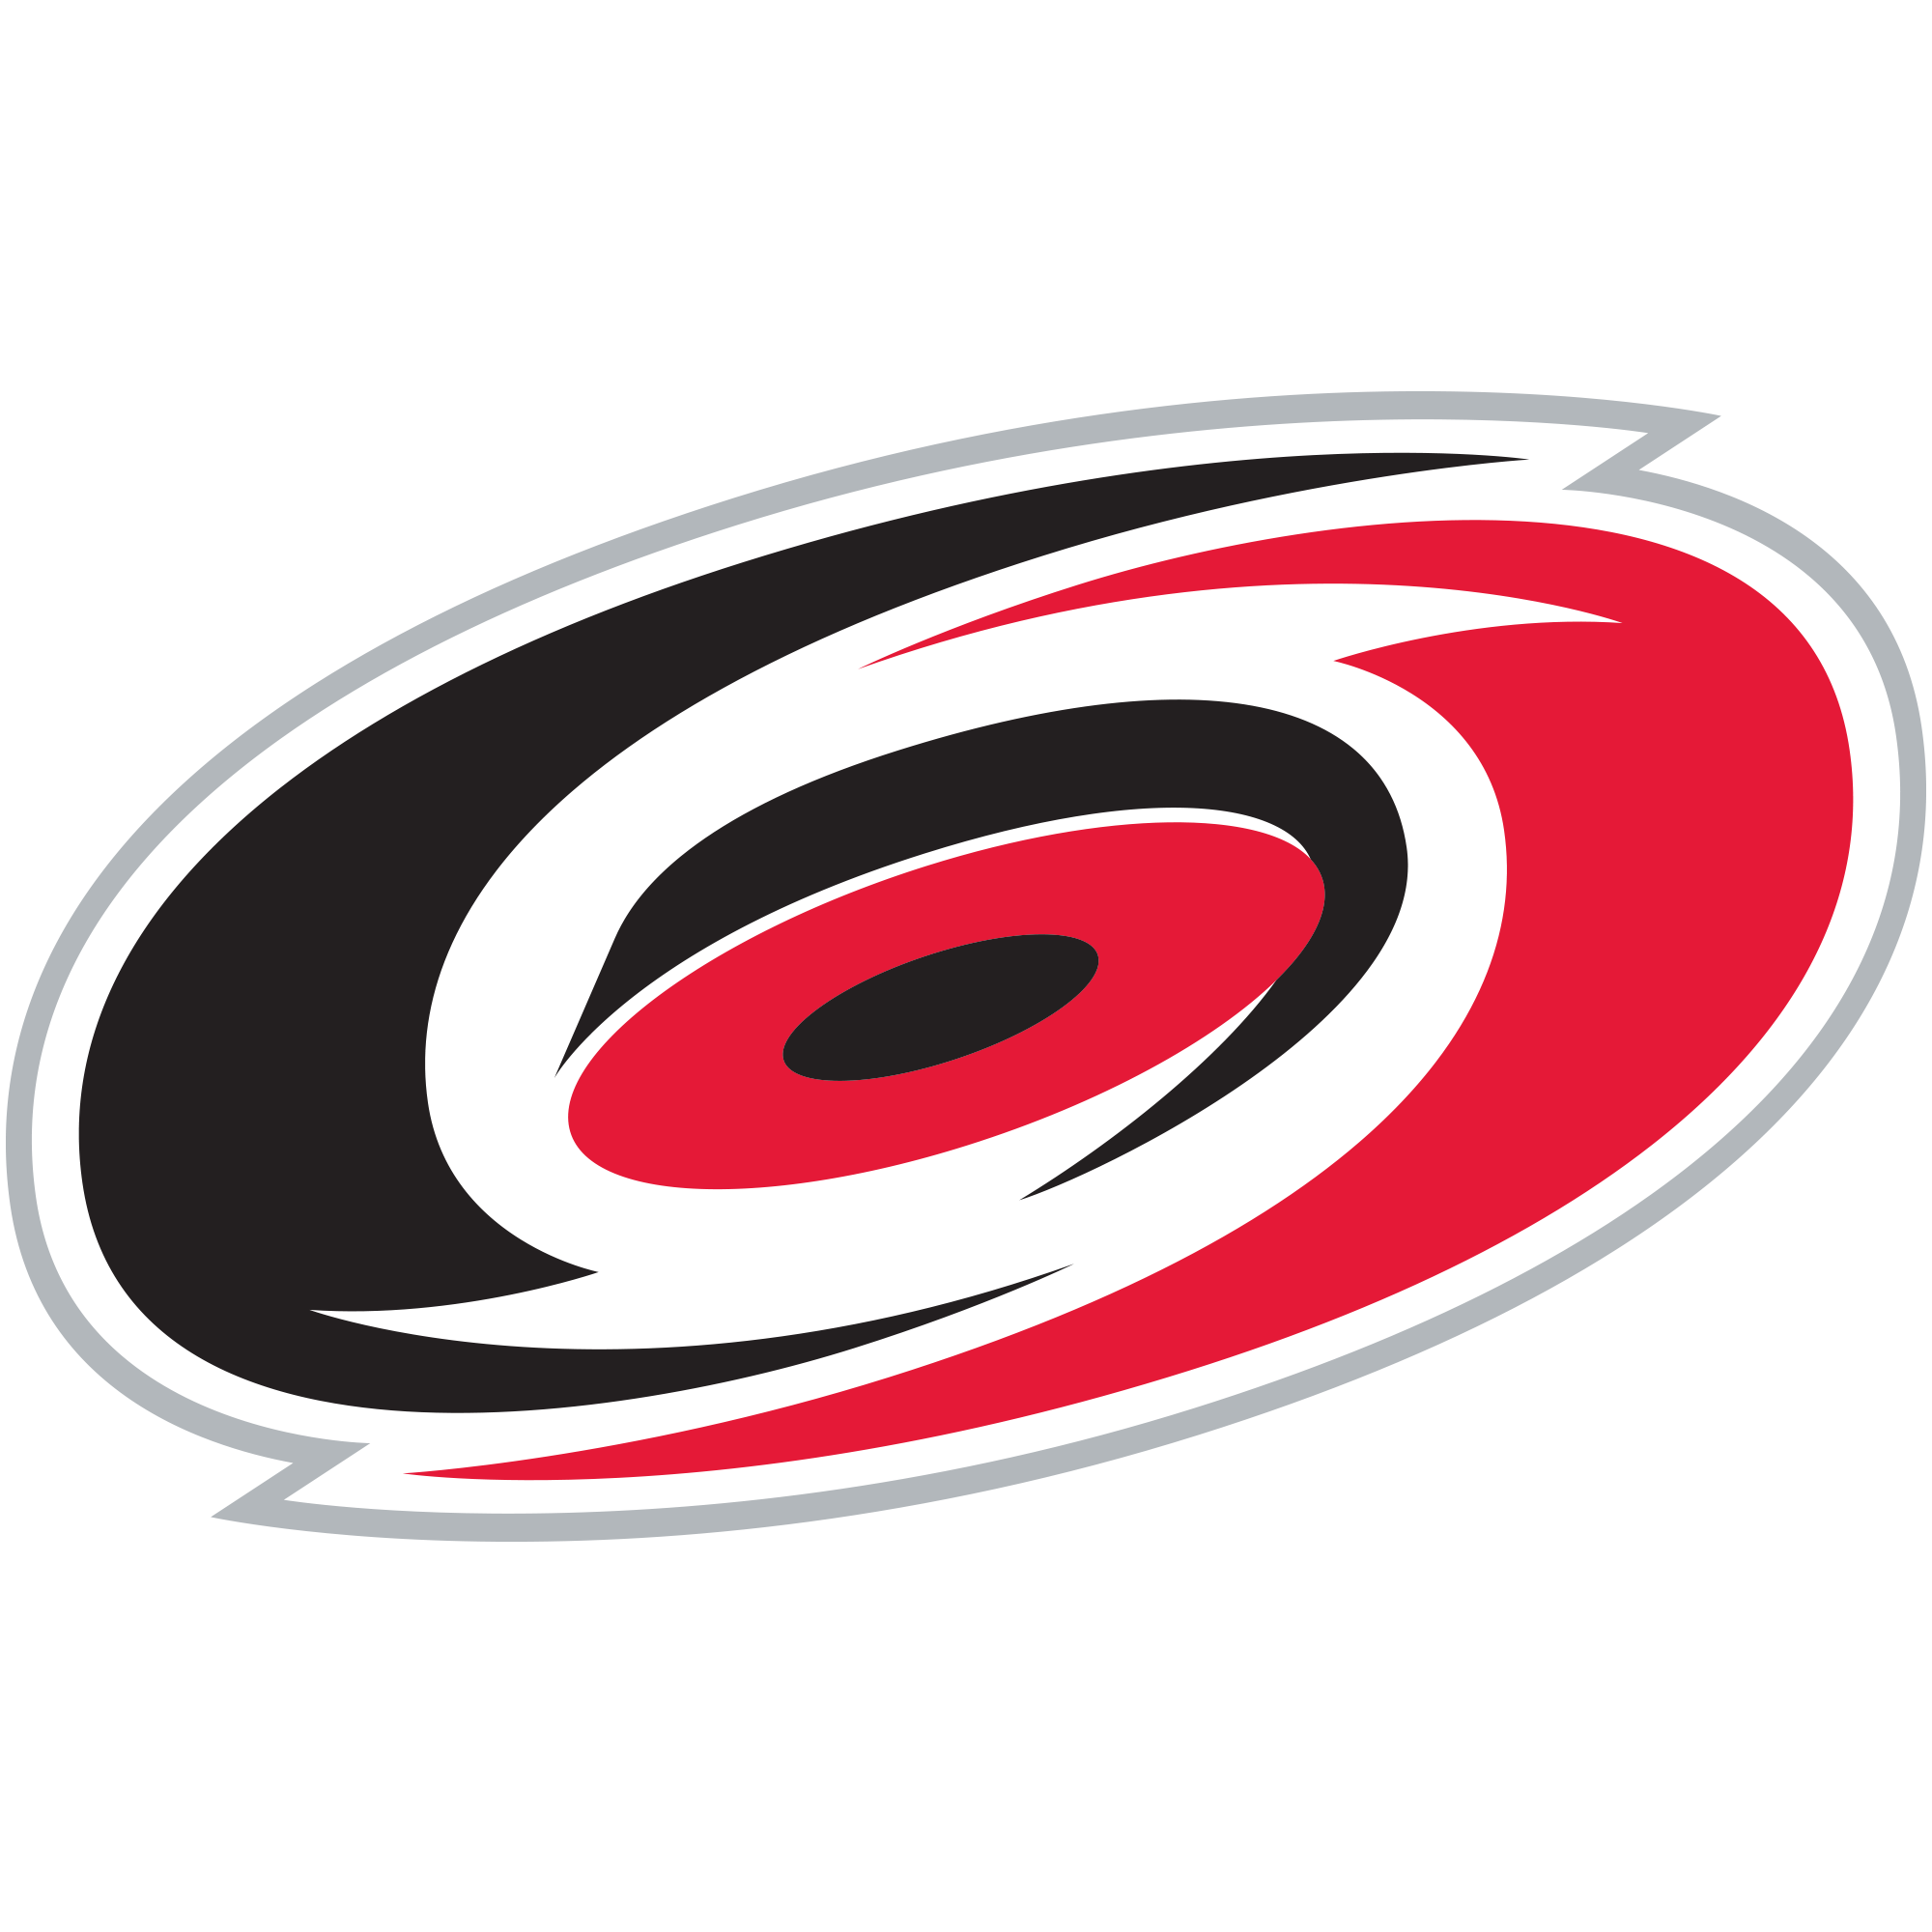 Hurricanes extend their arena lease in Raleigh through 2044 as part of a  major renovation project